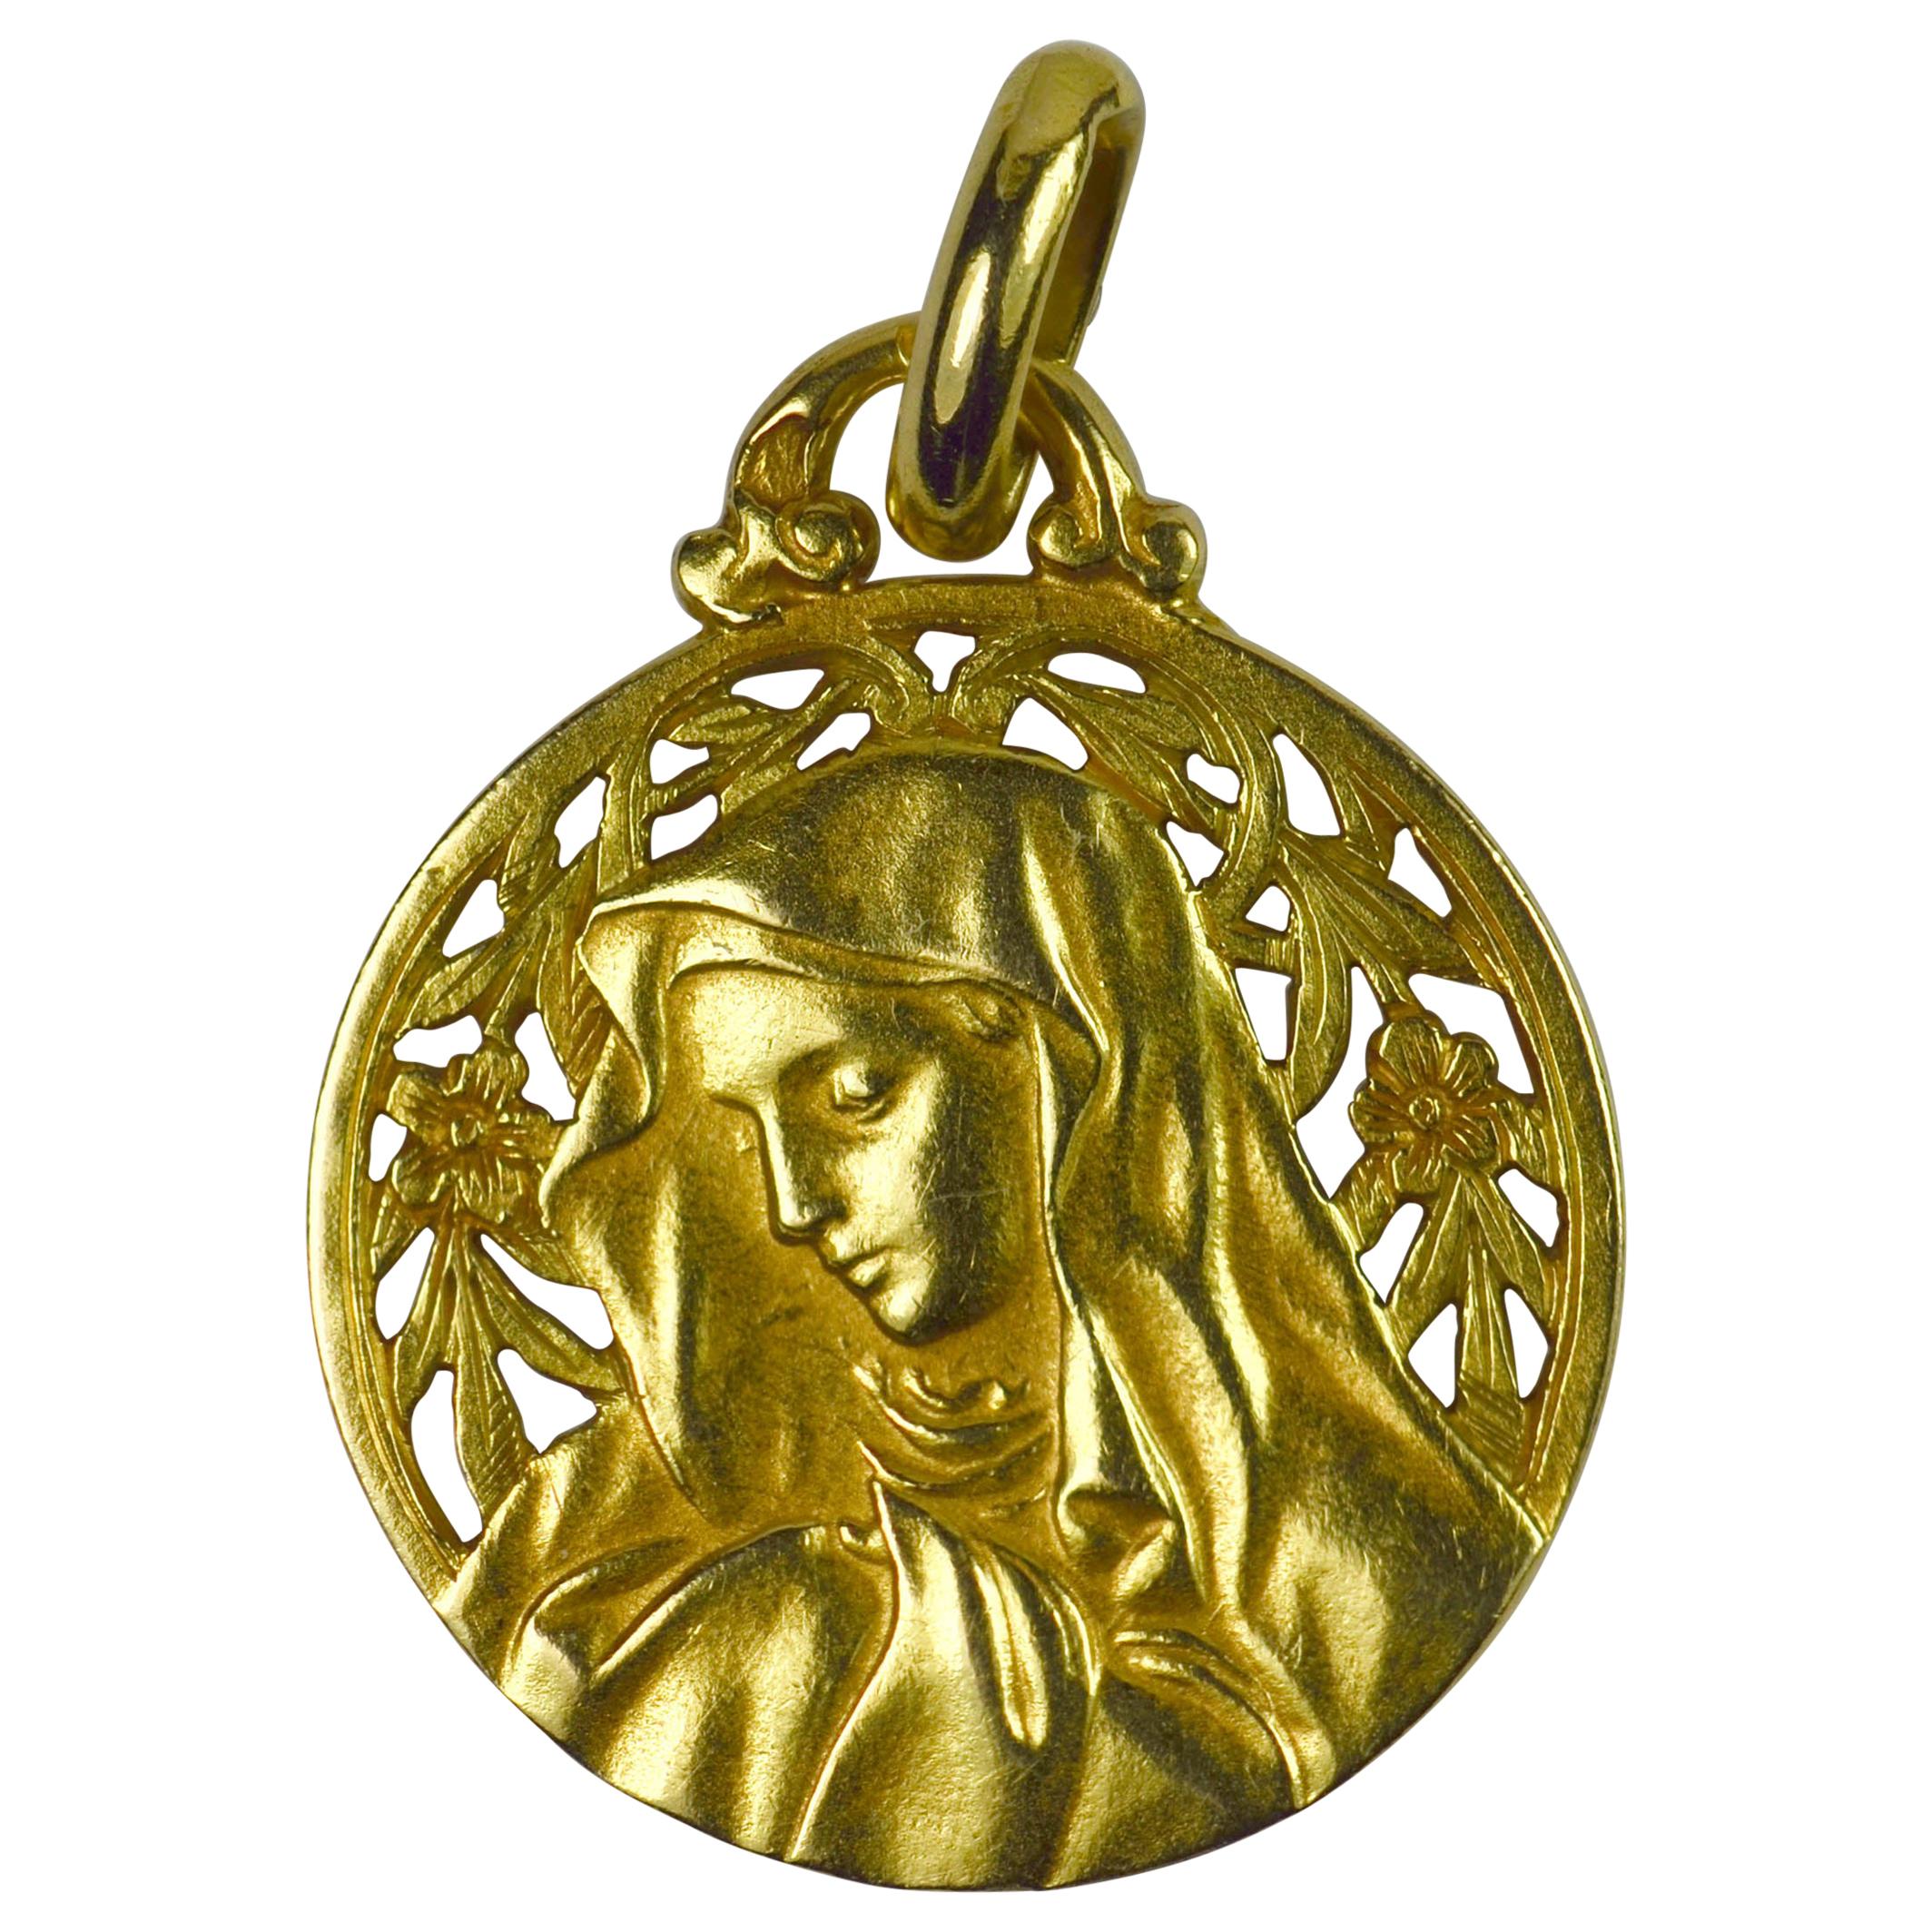 Details about   Vintage Nice 18k Solid White Gold Enamel St Mary Madonna Charm Pendant Necklace 